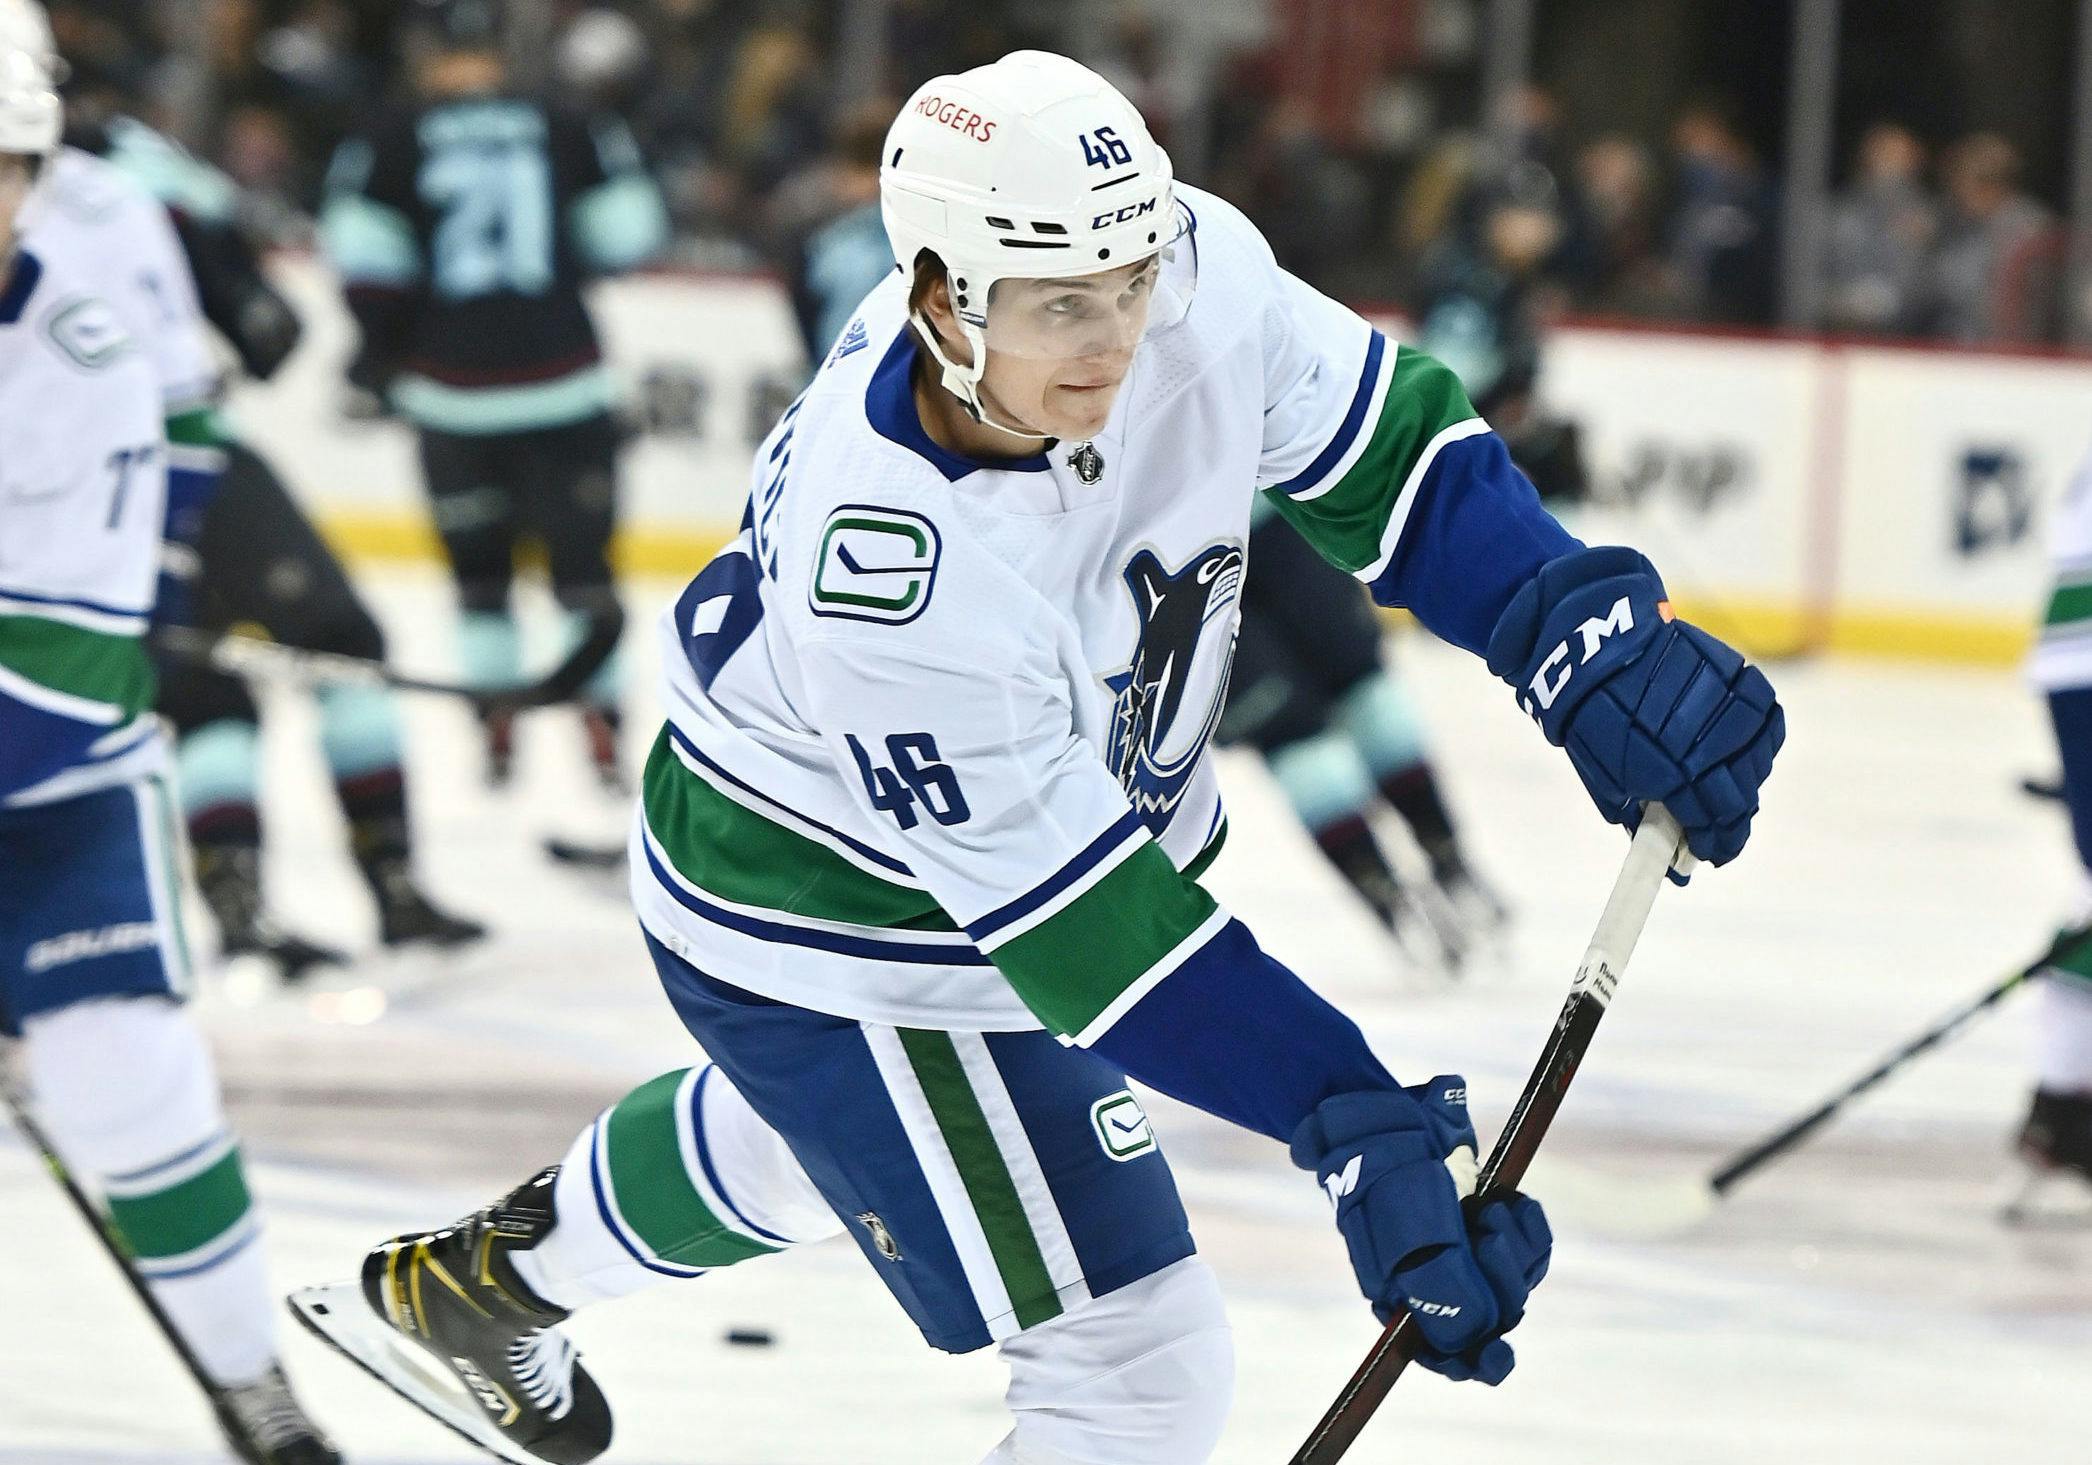 Abbotsford Canucks fall 3-2 in the shootout to San Diego - The